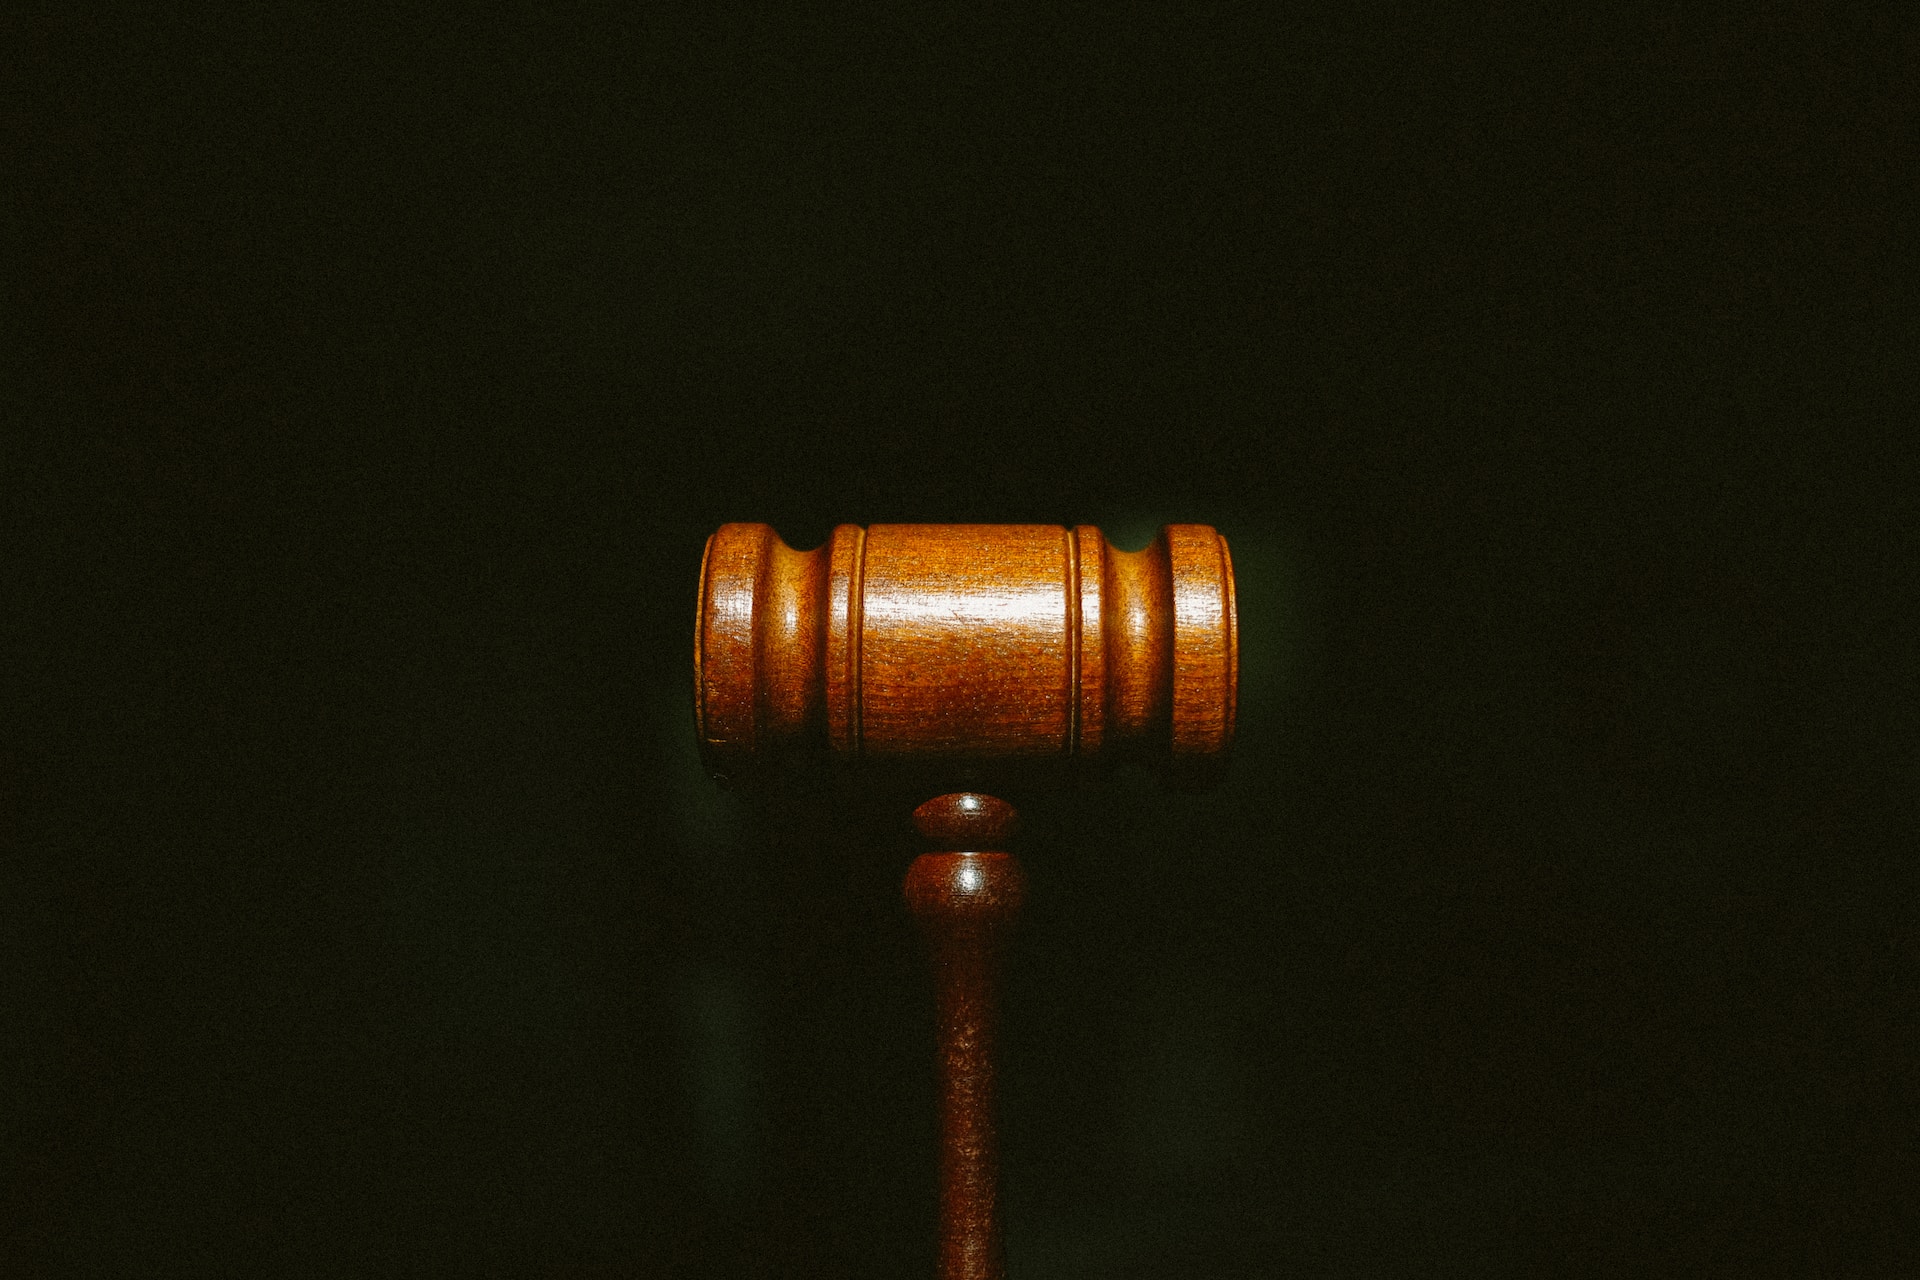 A photograph of a judge's gavel.